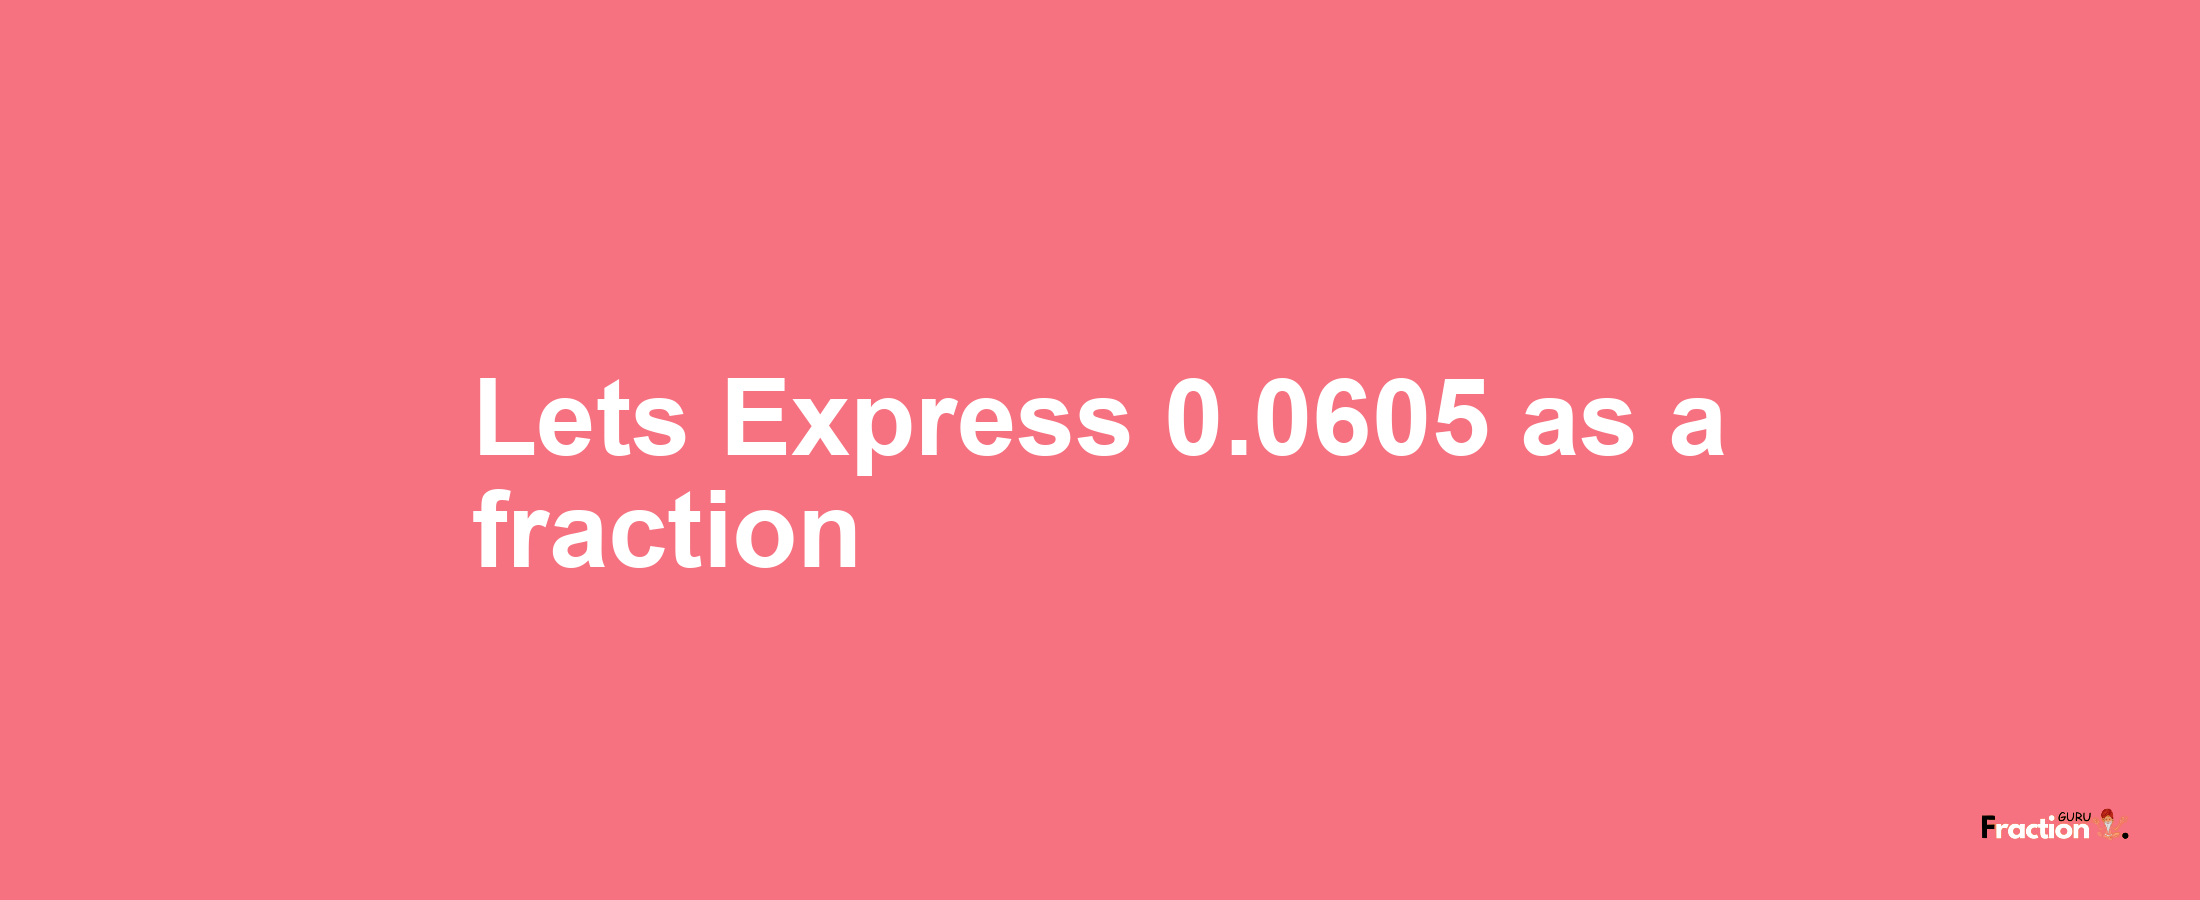 Lets Express 0.0605 as afraction